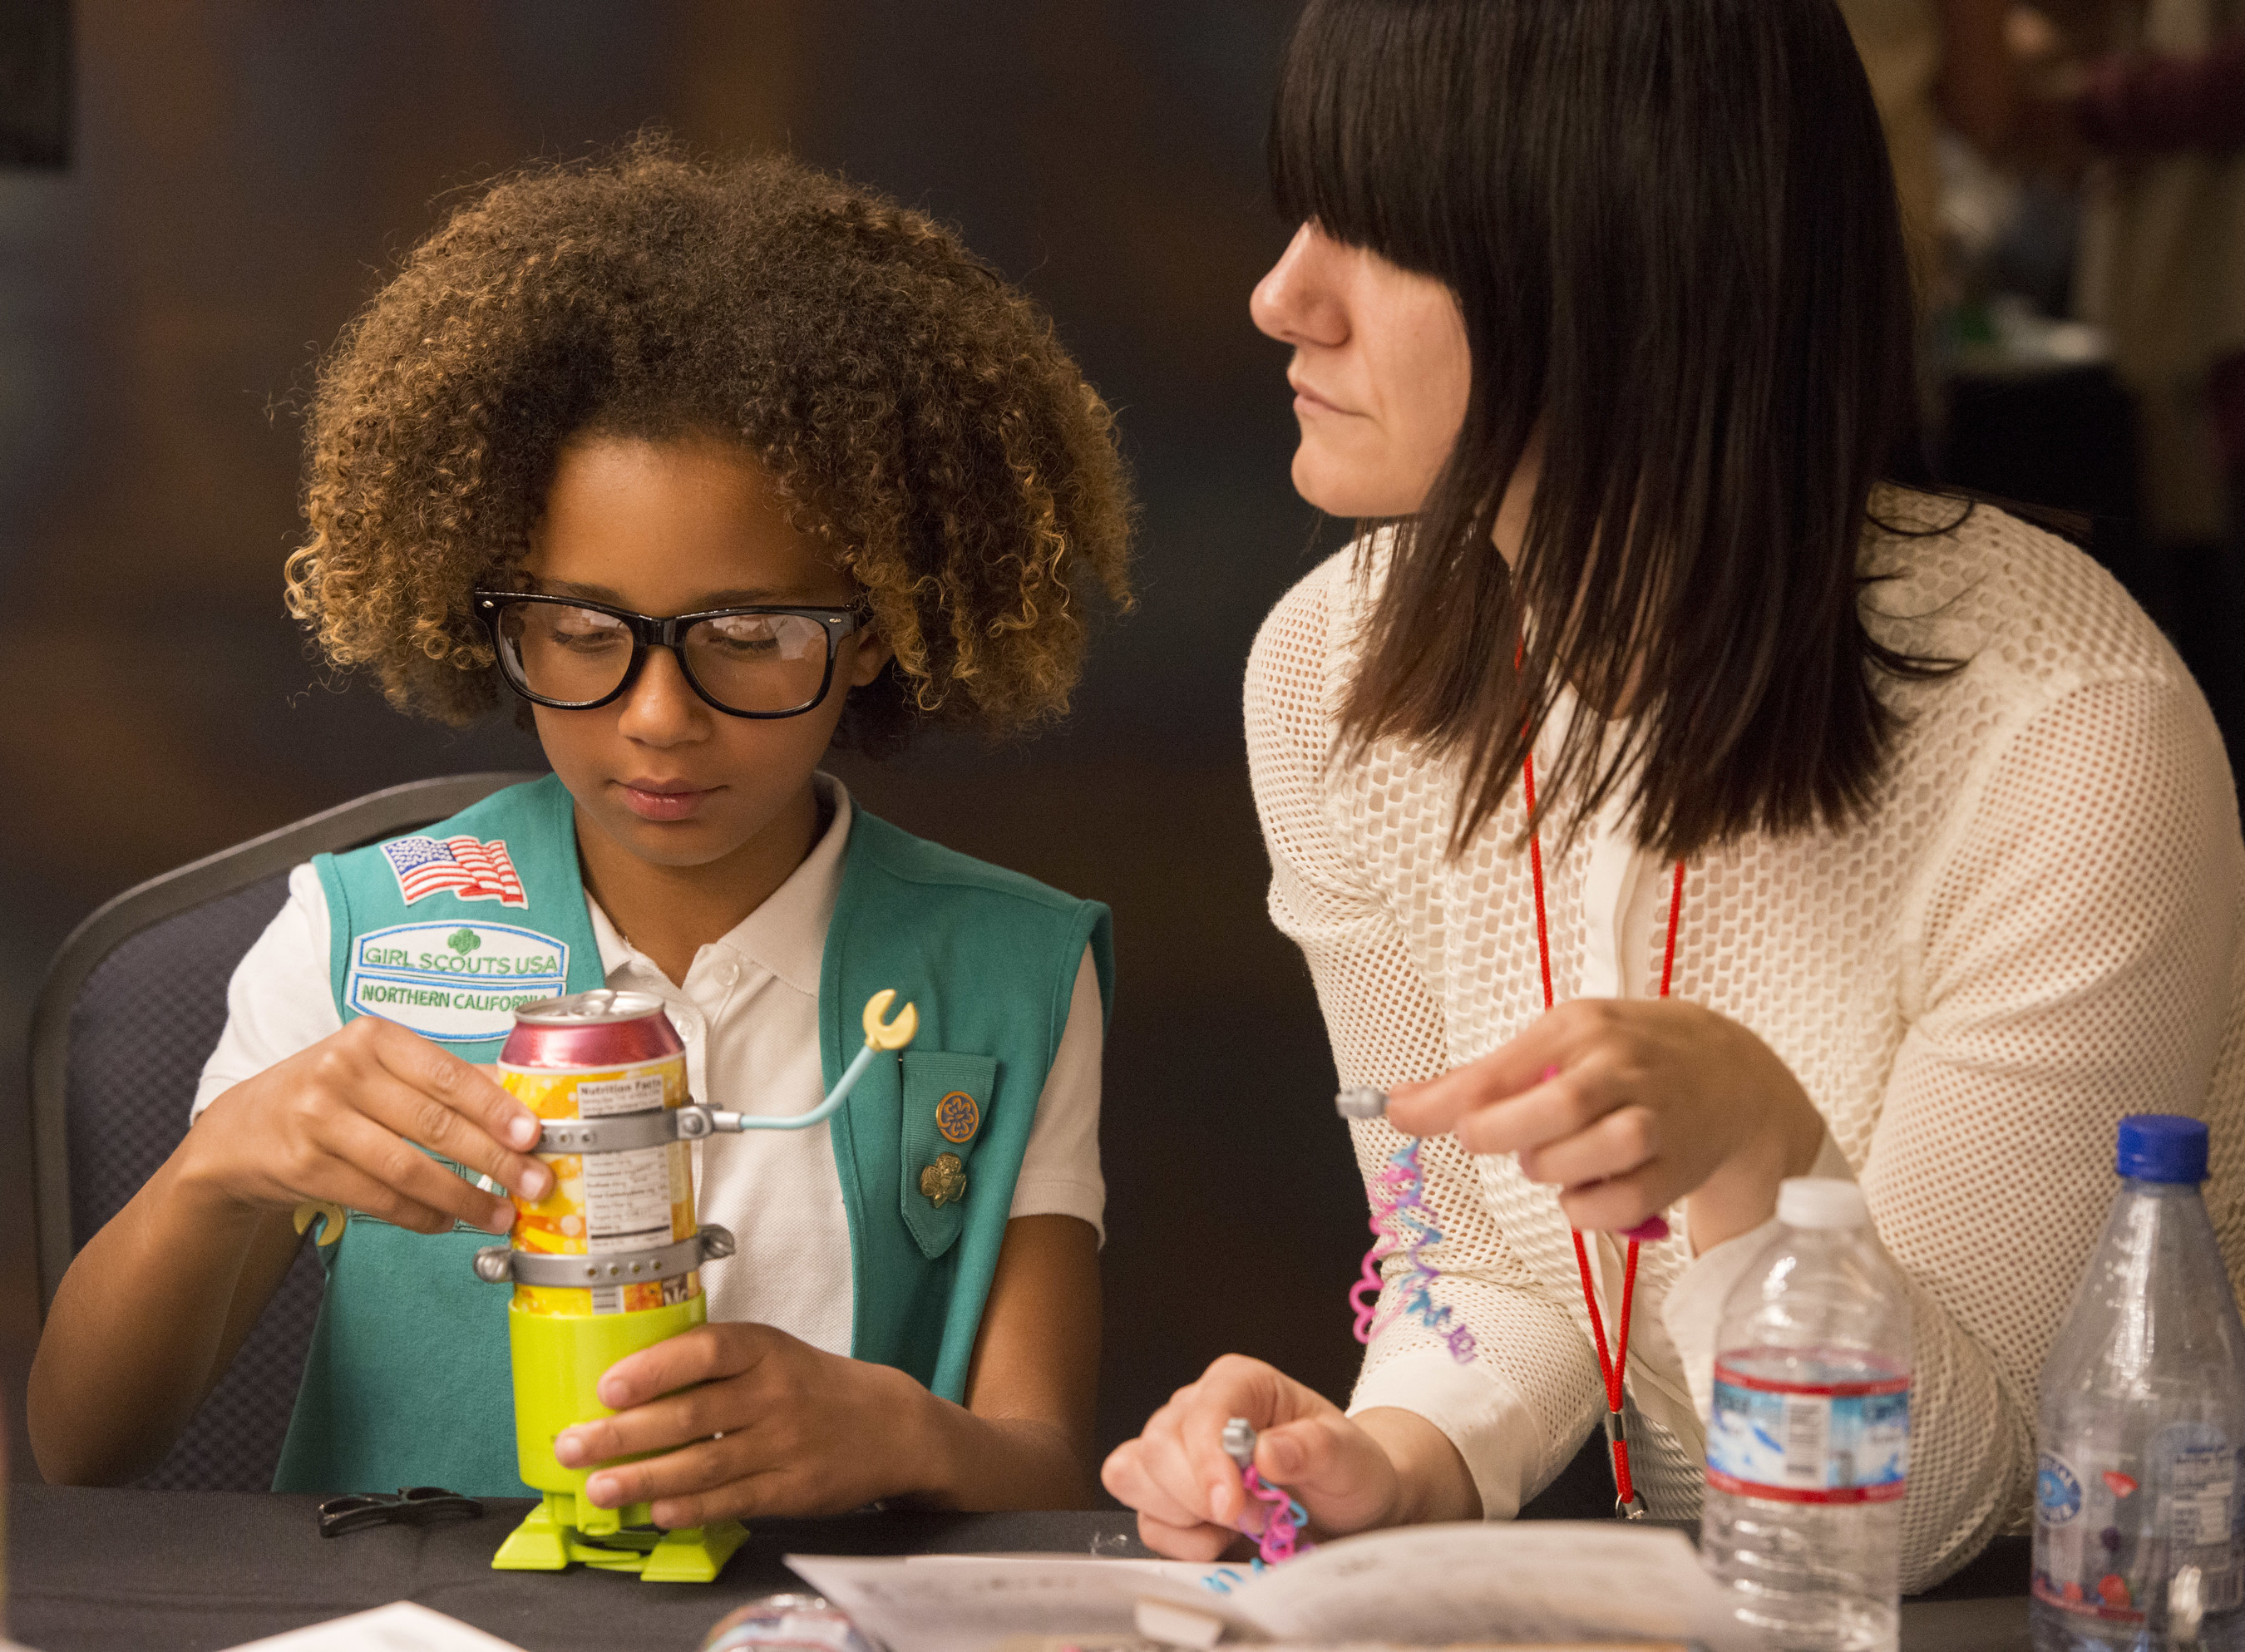 A Girl Scout builds a soda can robot with help from a female tech executive at the "She Rules: STEM" event at Netflix headquarters in Los Gatos, Calif., Tuesday, Oct. 4, 2016. Girl Scout troops representing Girl Scouts of Northern California met with real-world STEM experts to encourage the pursuit of STEM career paths for young girls.